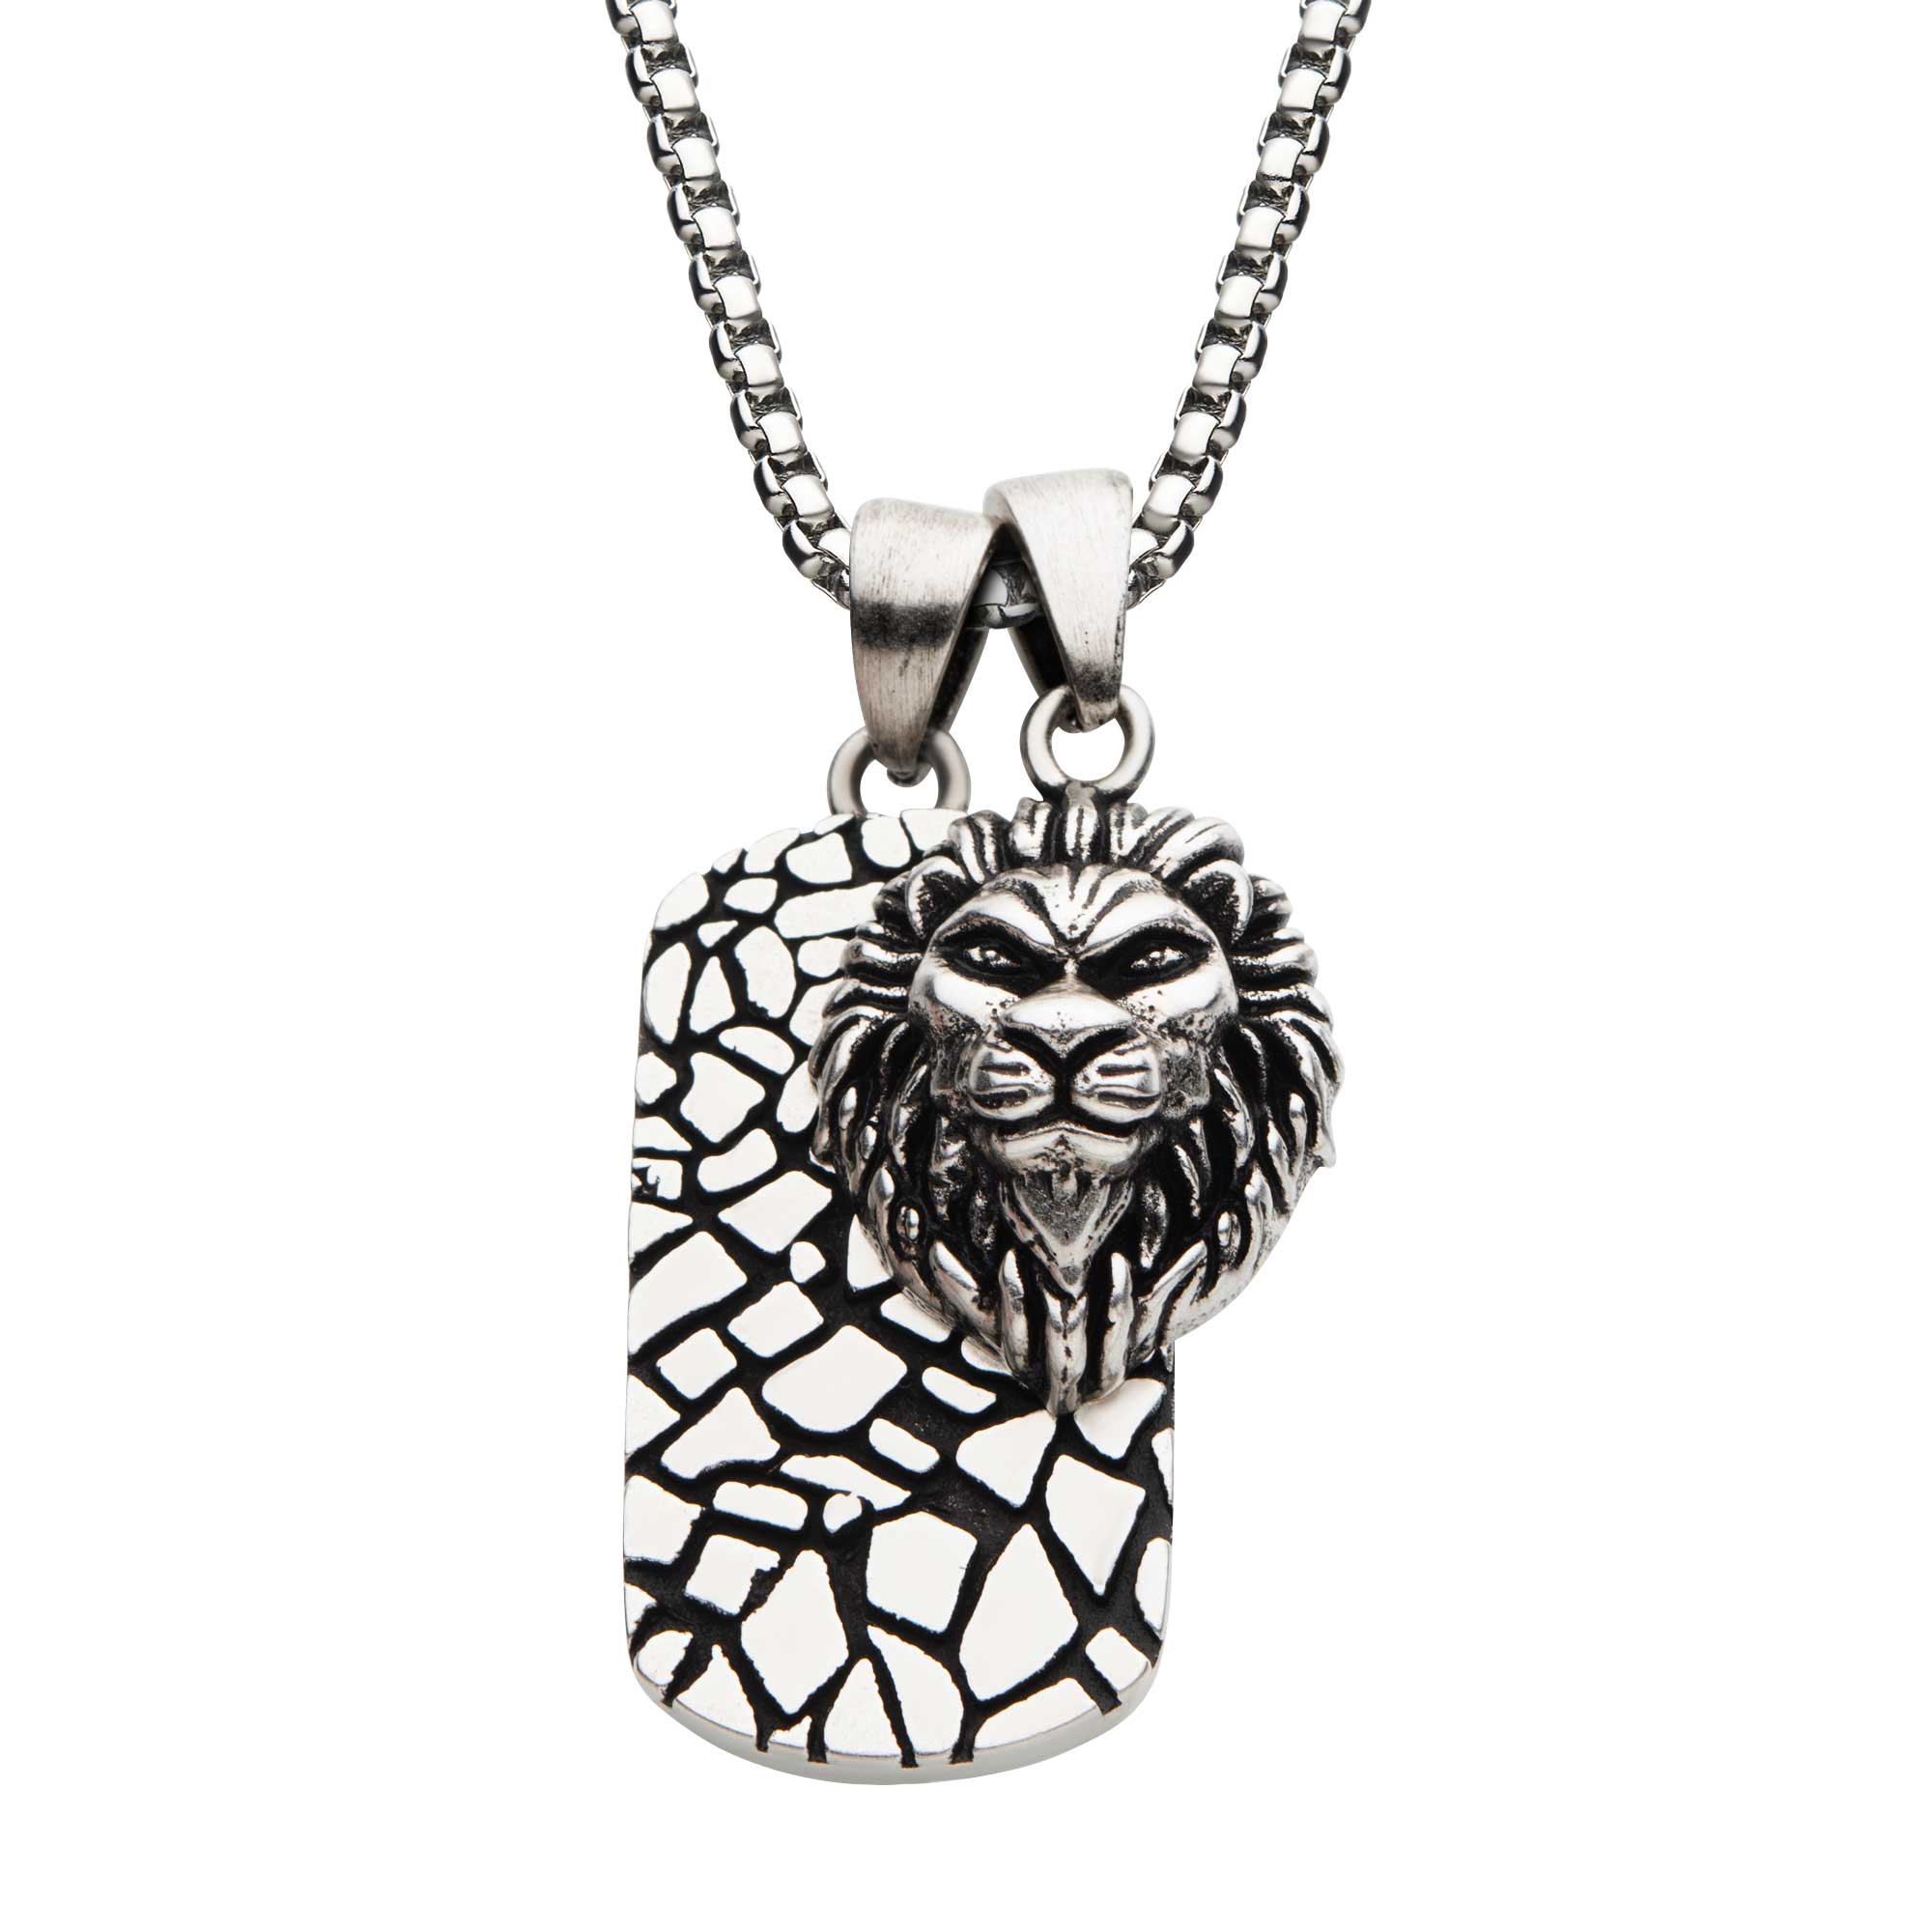 Stainless Steel with 3D Lion Head Dog Tag Pendant, with Antique Silver Plated Chain Ken Walker Jewelers Gig Harbor, WA